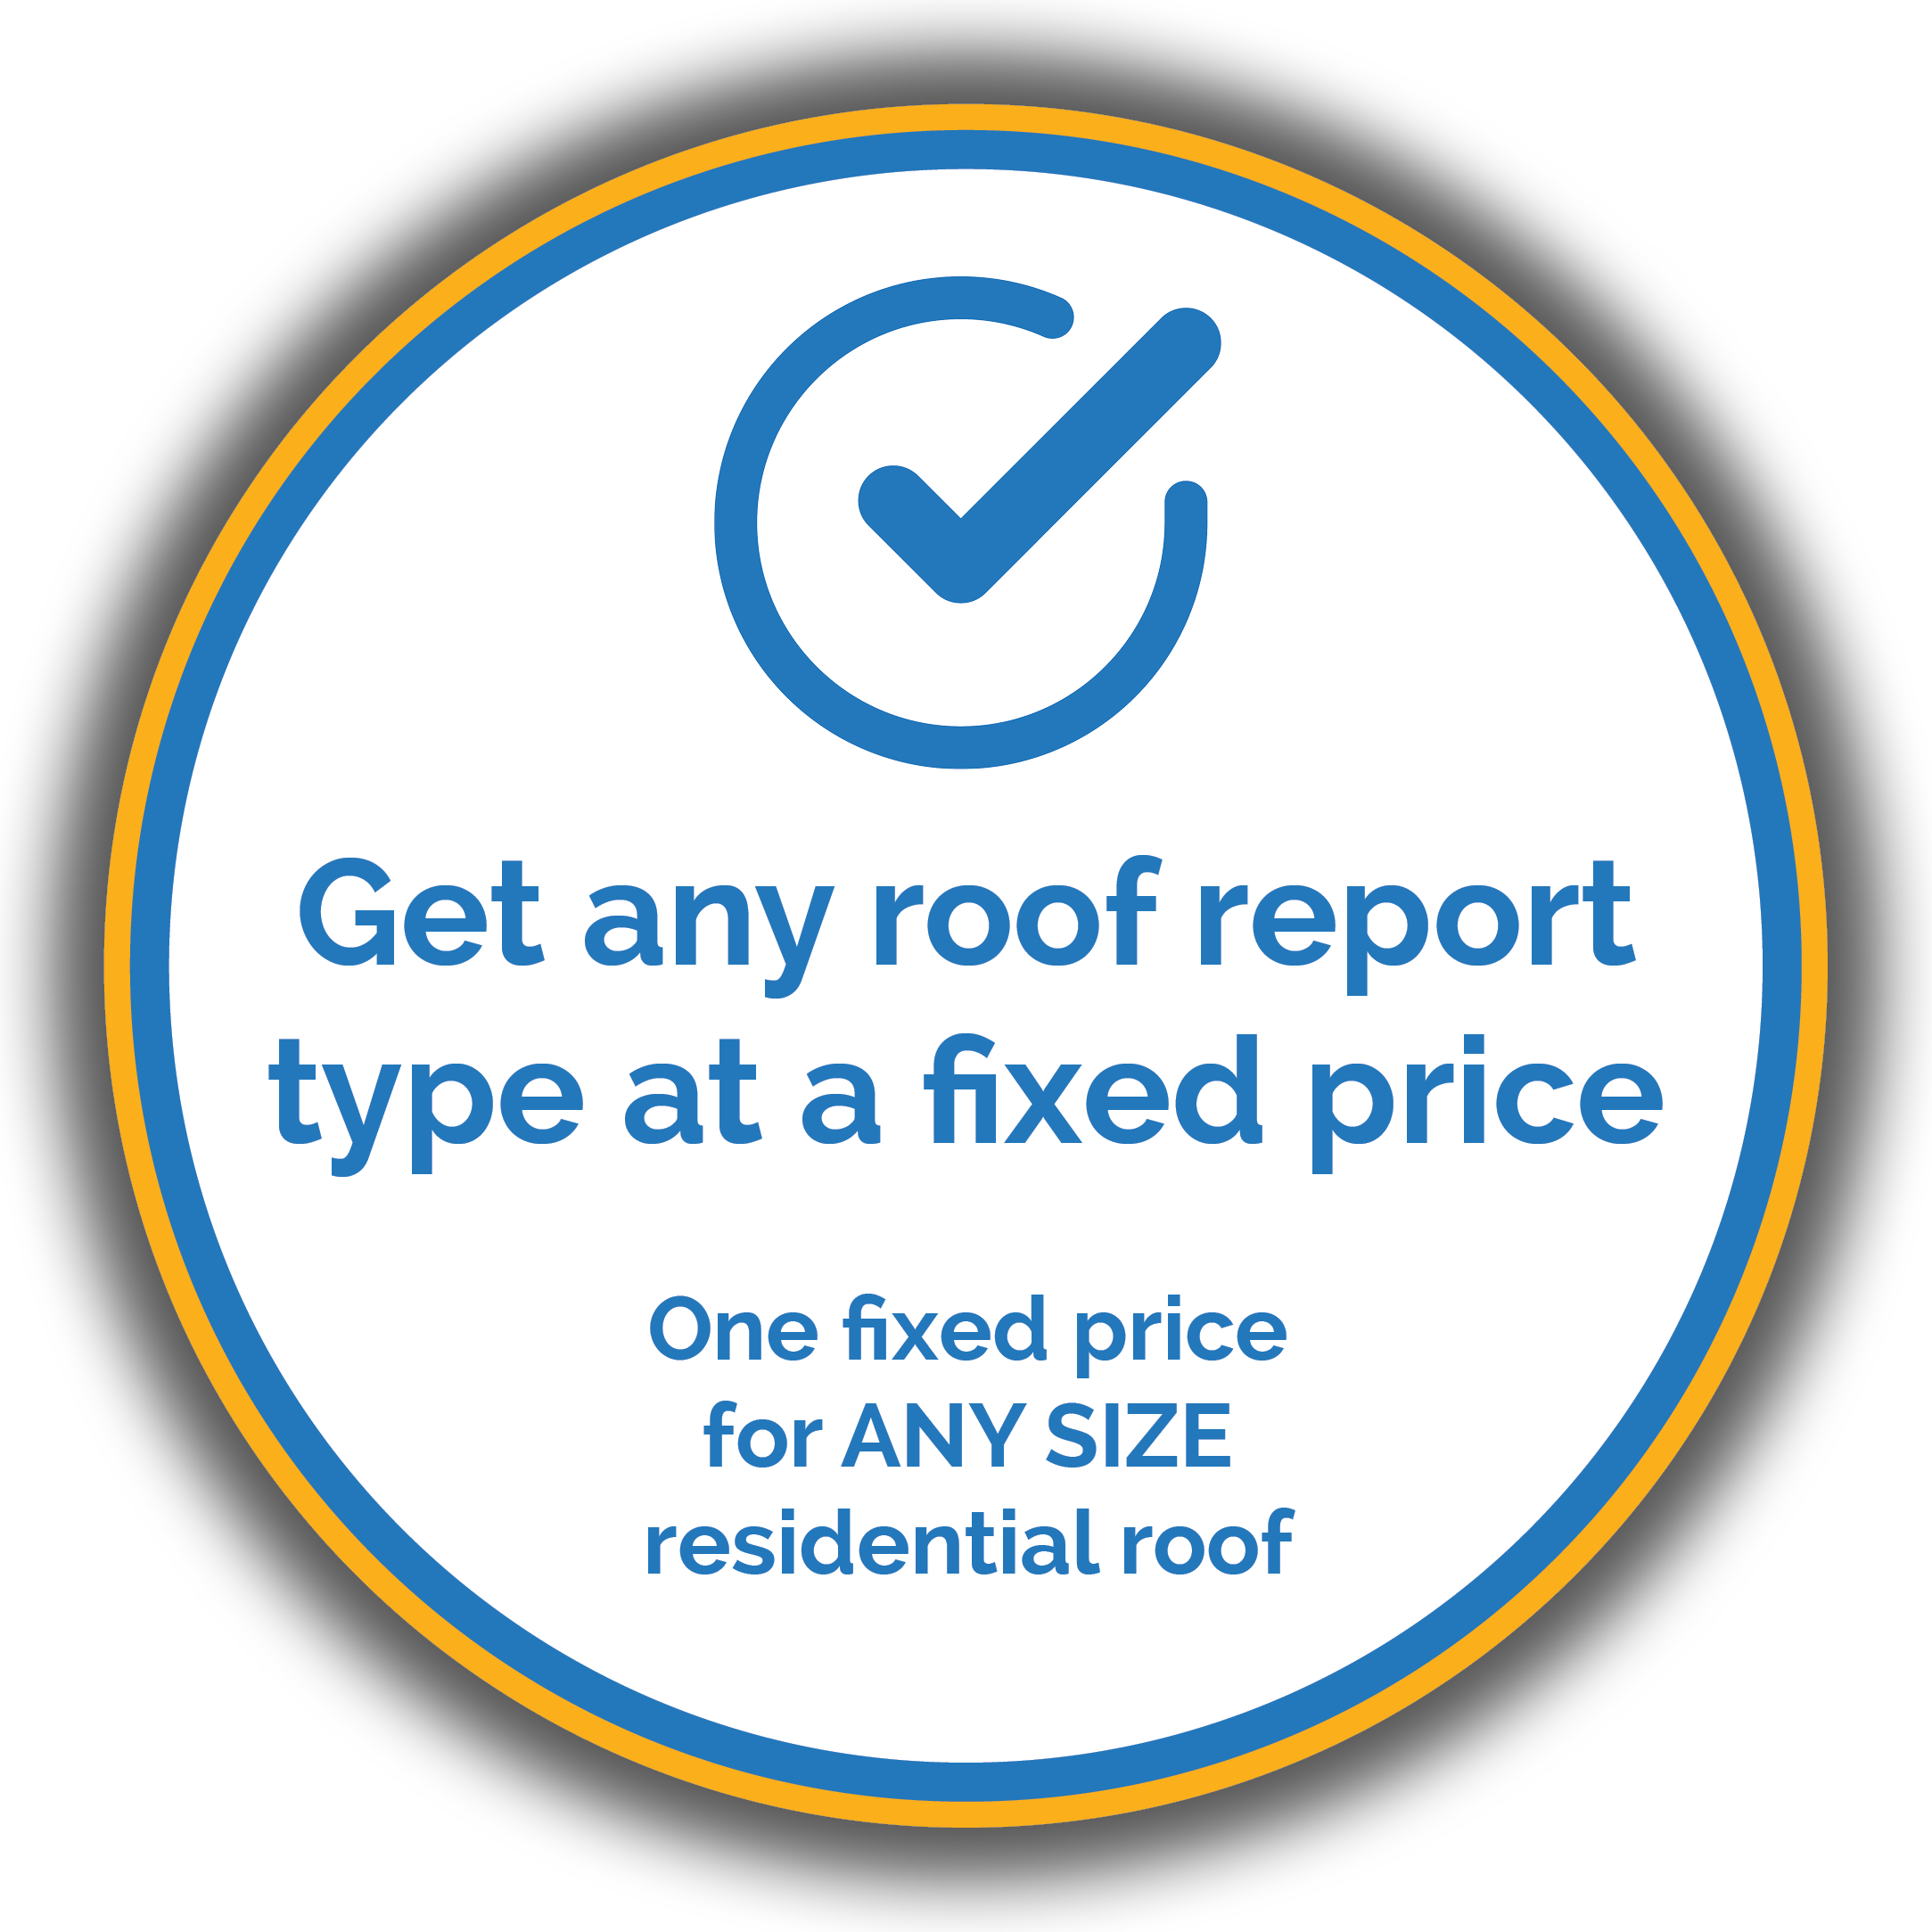 SkyMeasure - Fixed price roof rerport